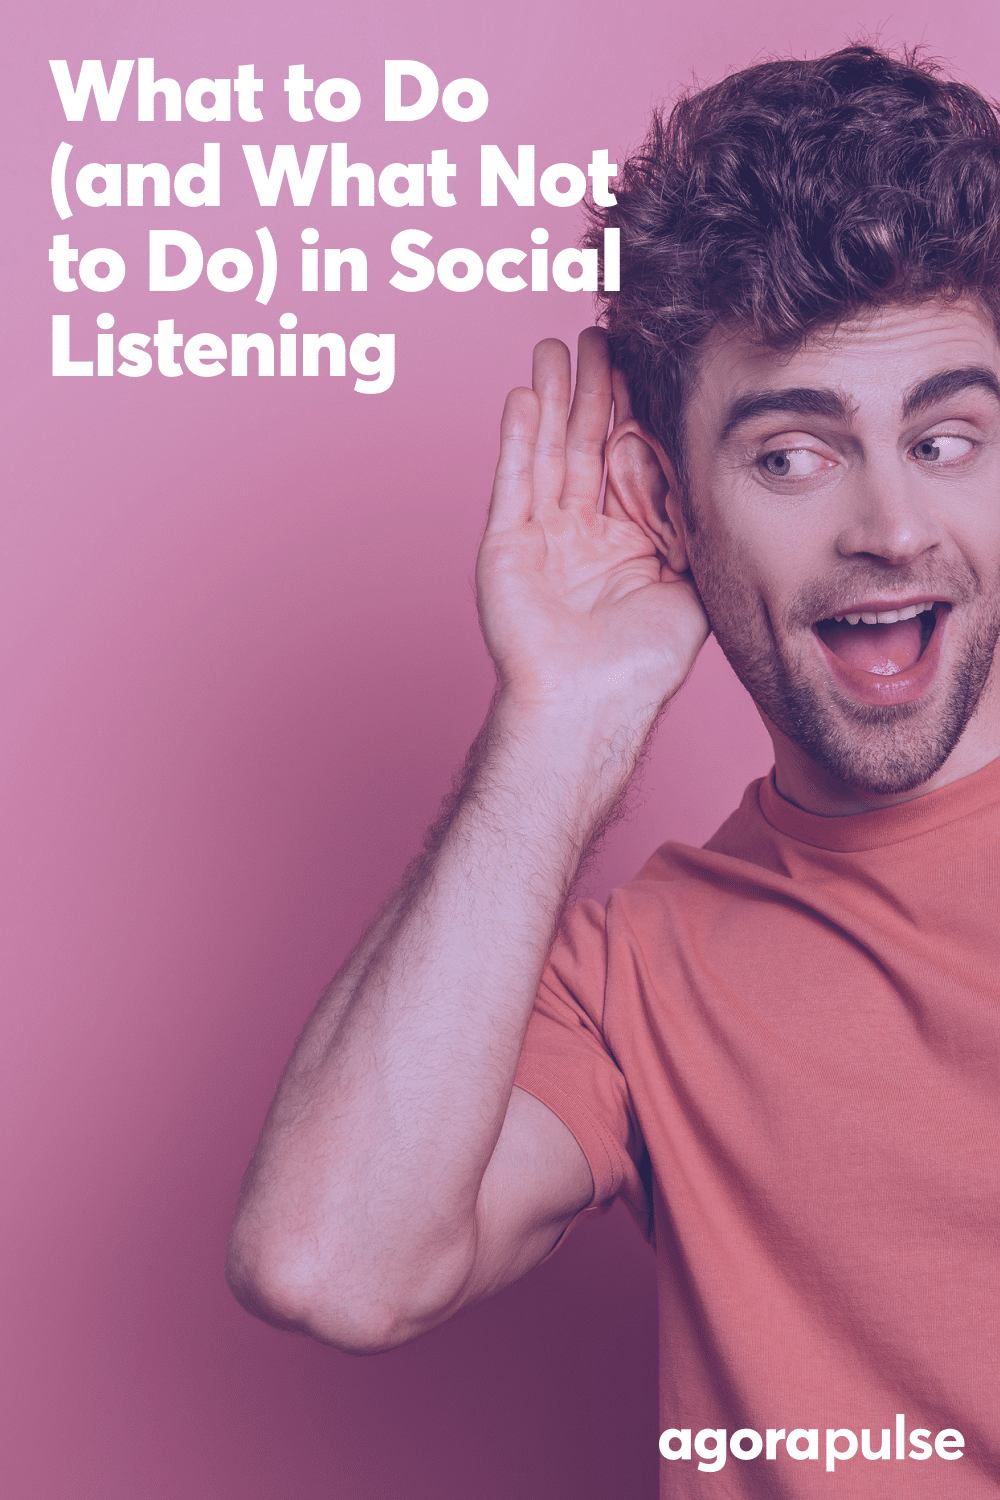 What to Do (and What Not to Do) in Social Listening